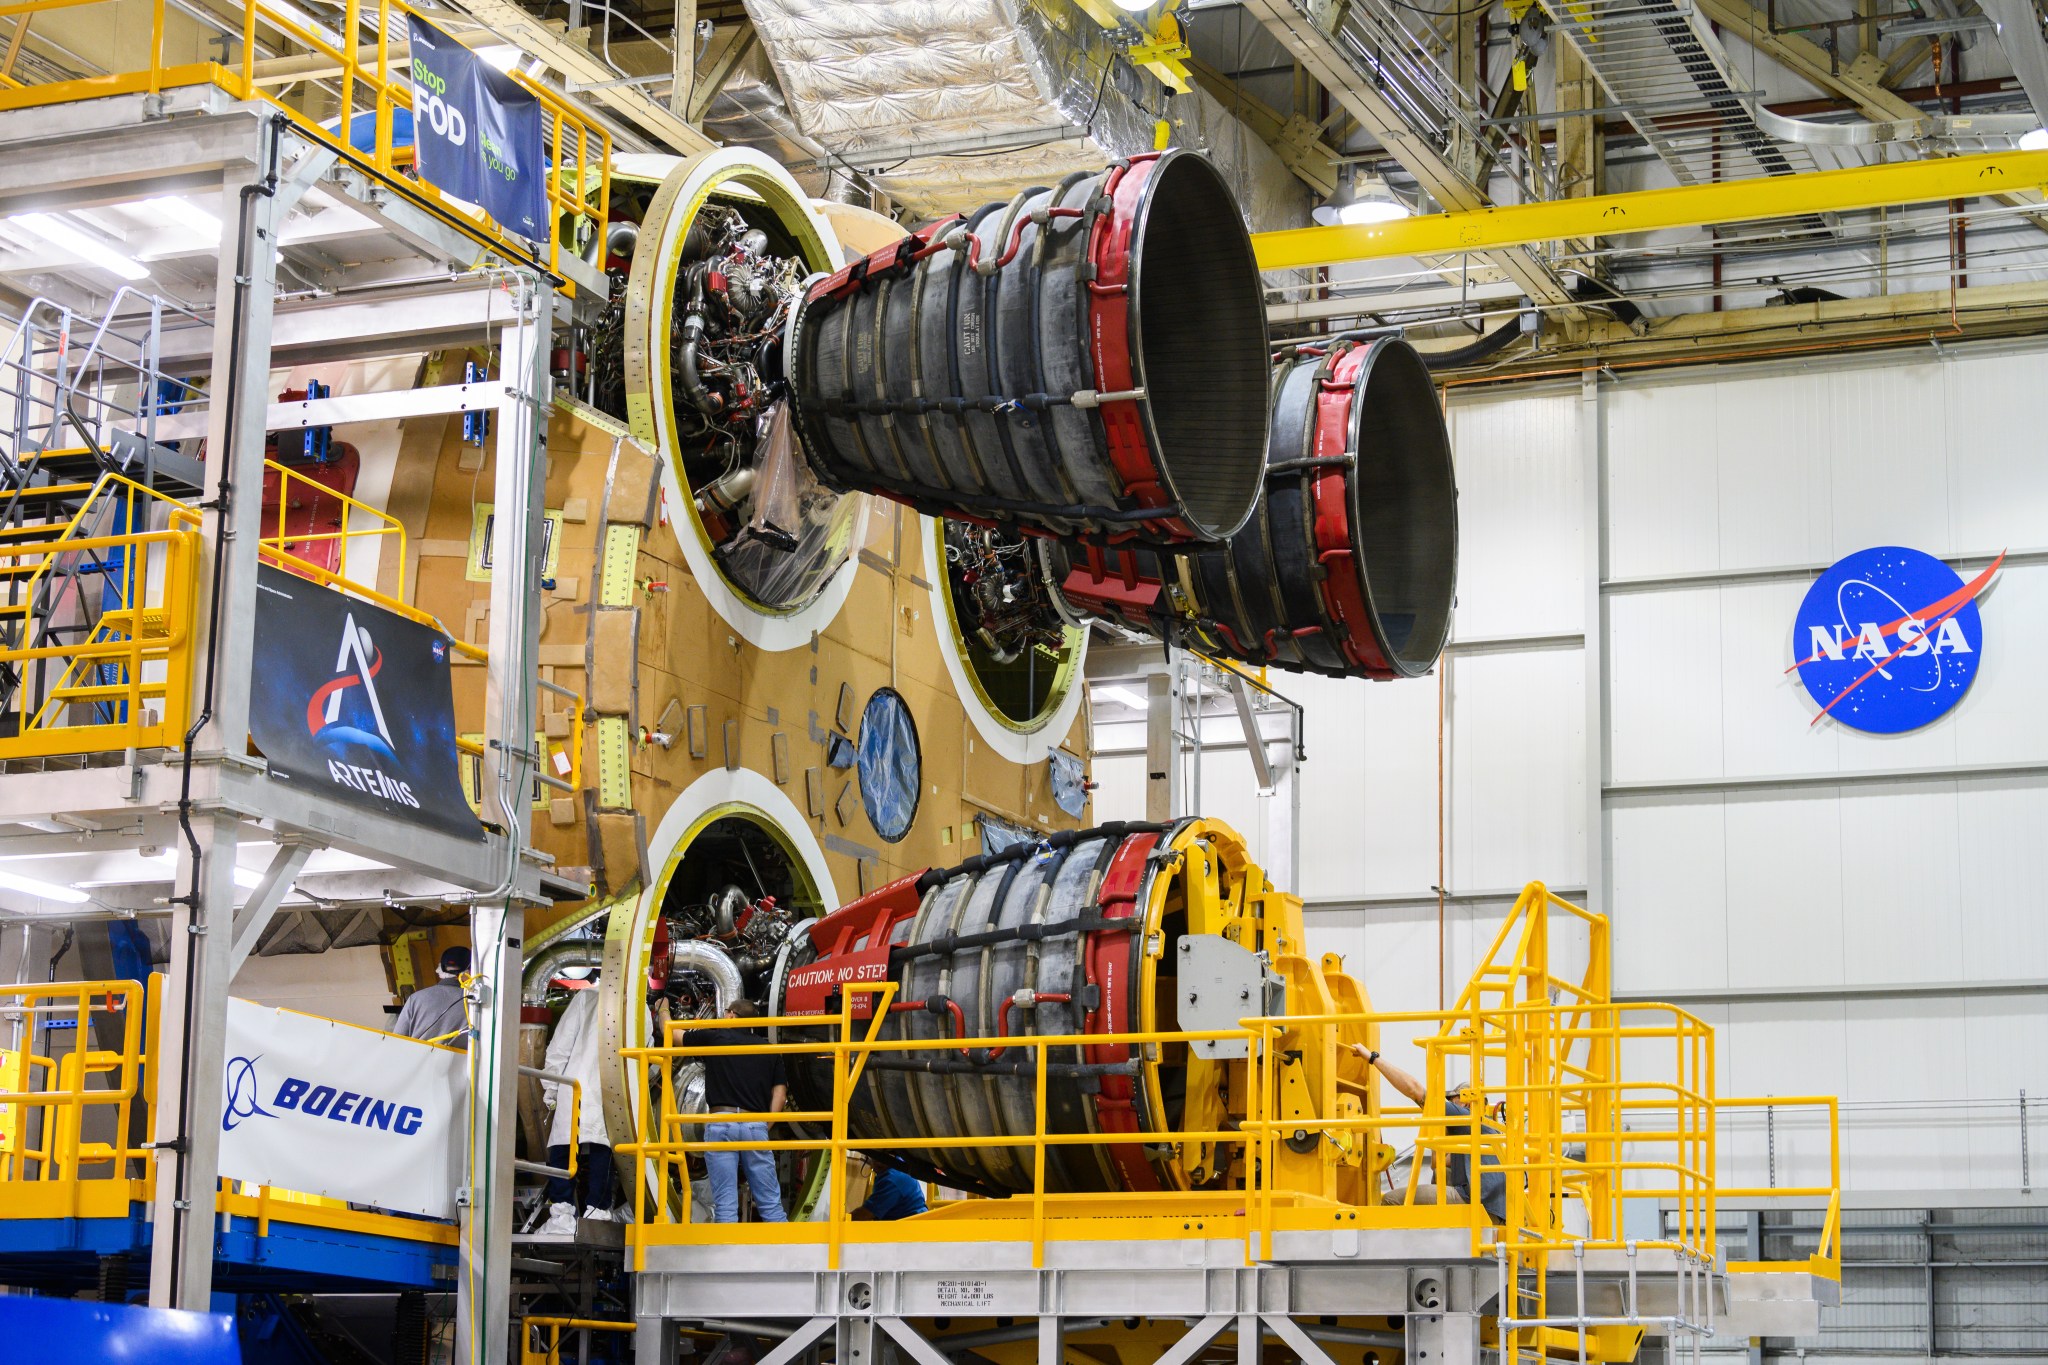 Crews at NASA’s Michoud Assembly Facility attached the third RS-25 engines to the core stage for NASA’s Space Launch System.